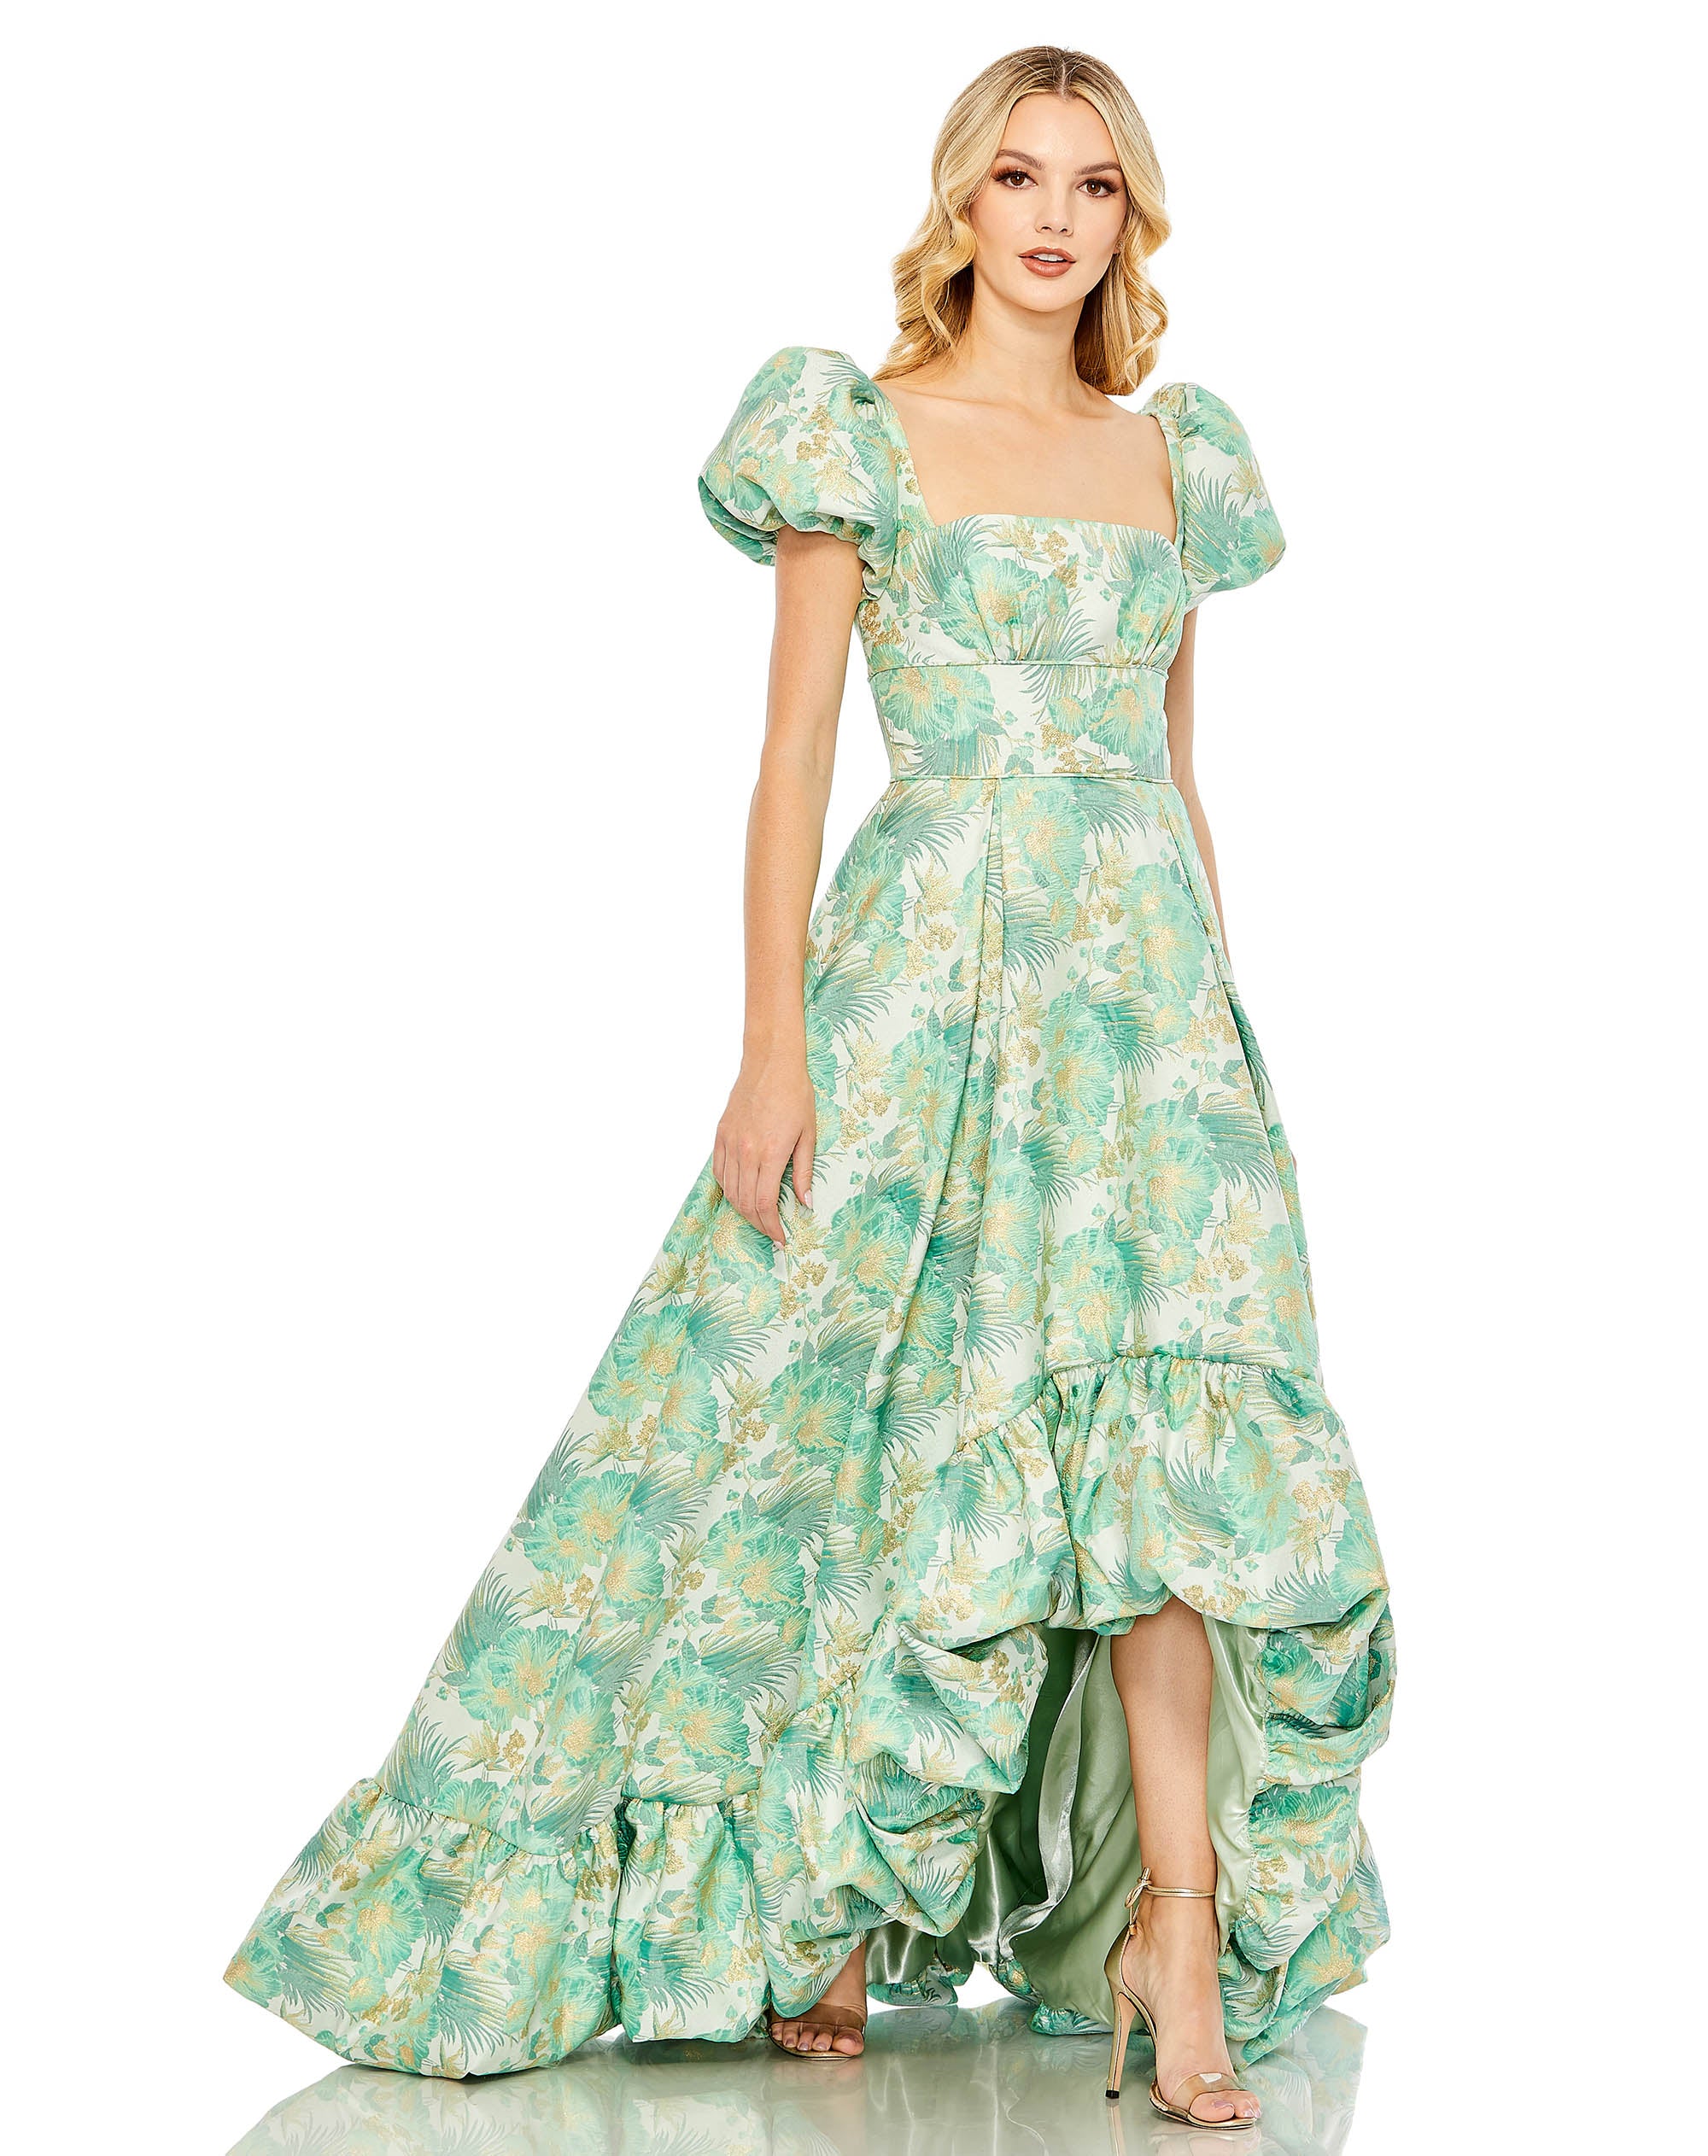 Floral Print Puff Sleeve High Low Brocade Gown